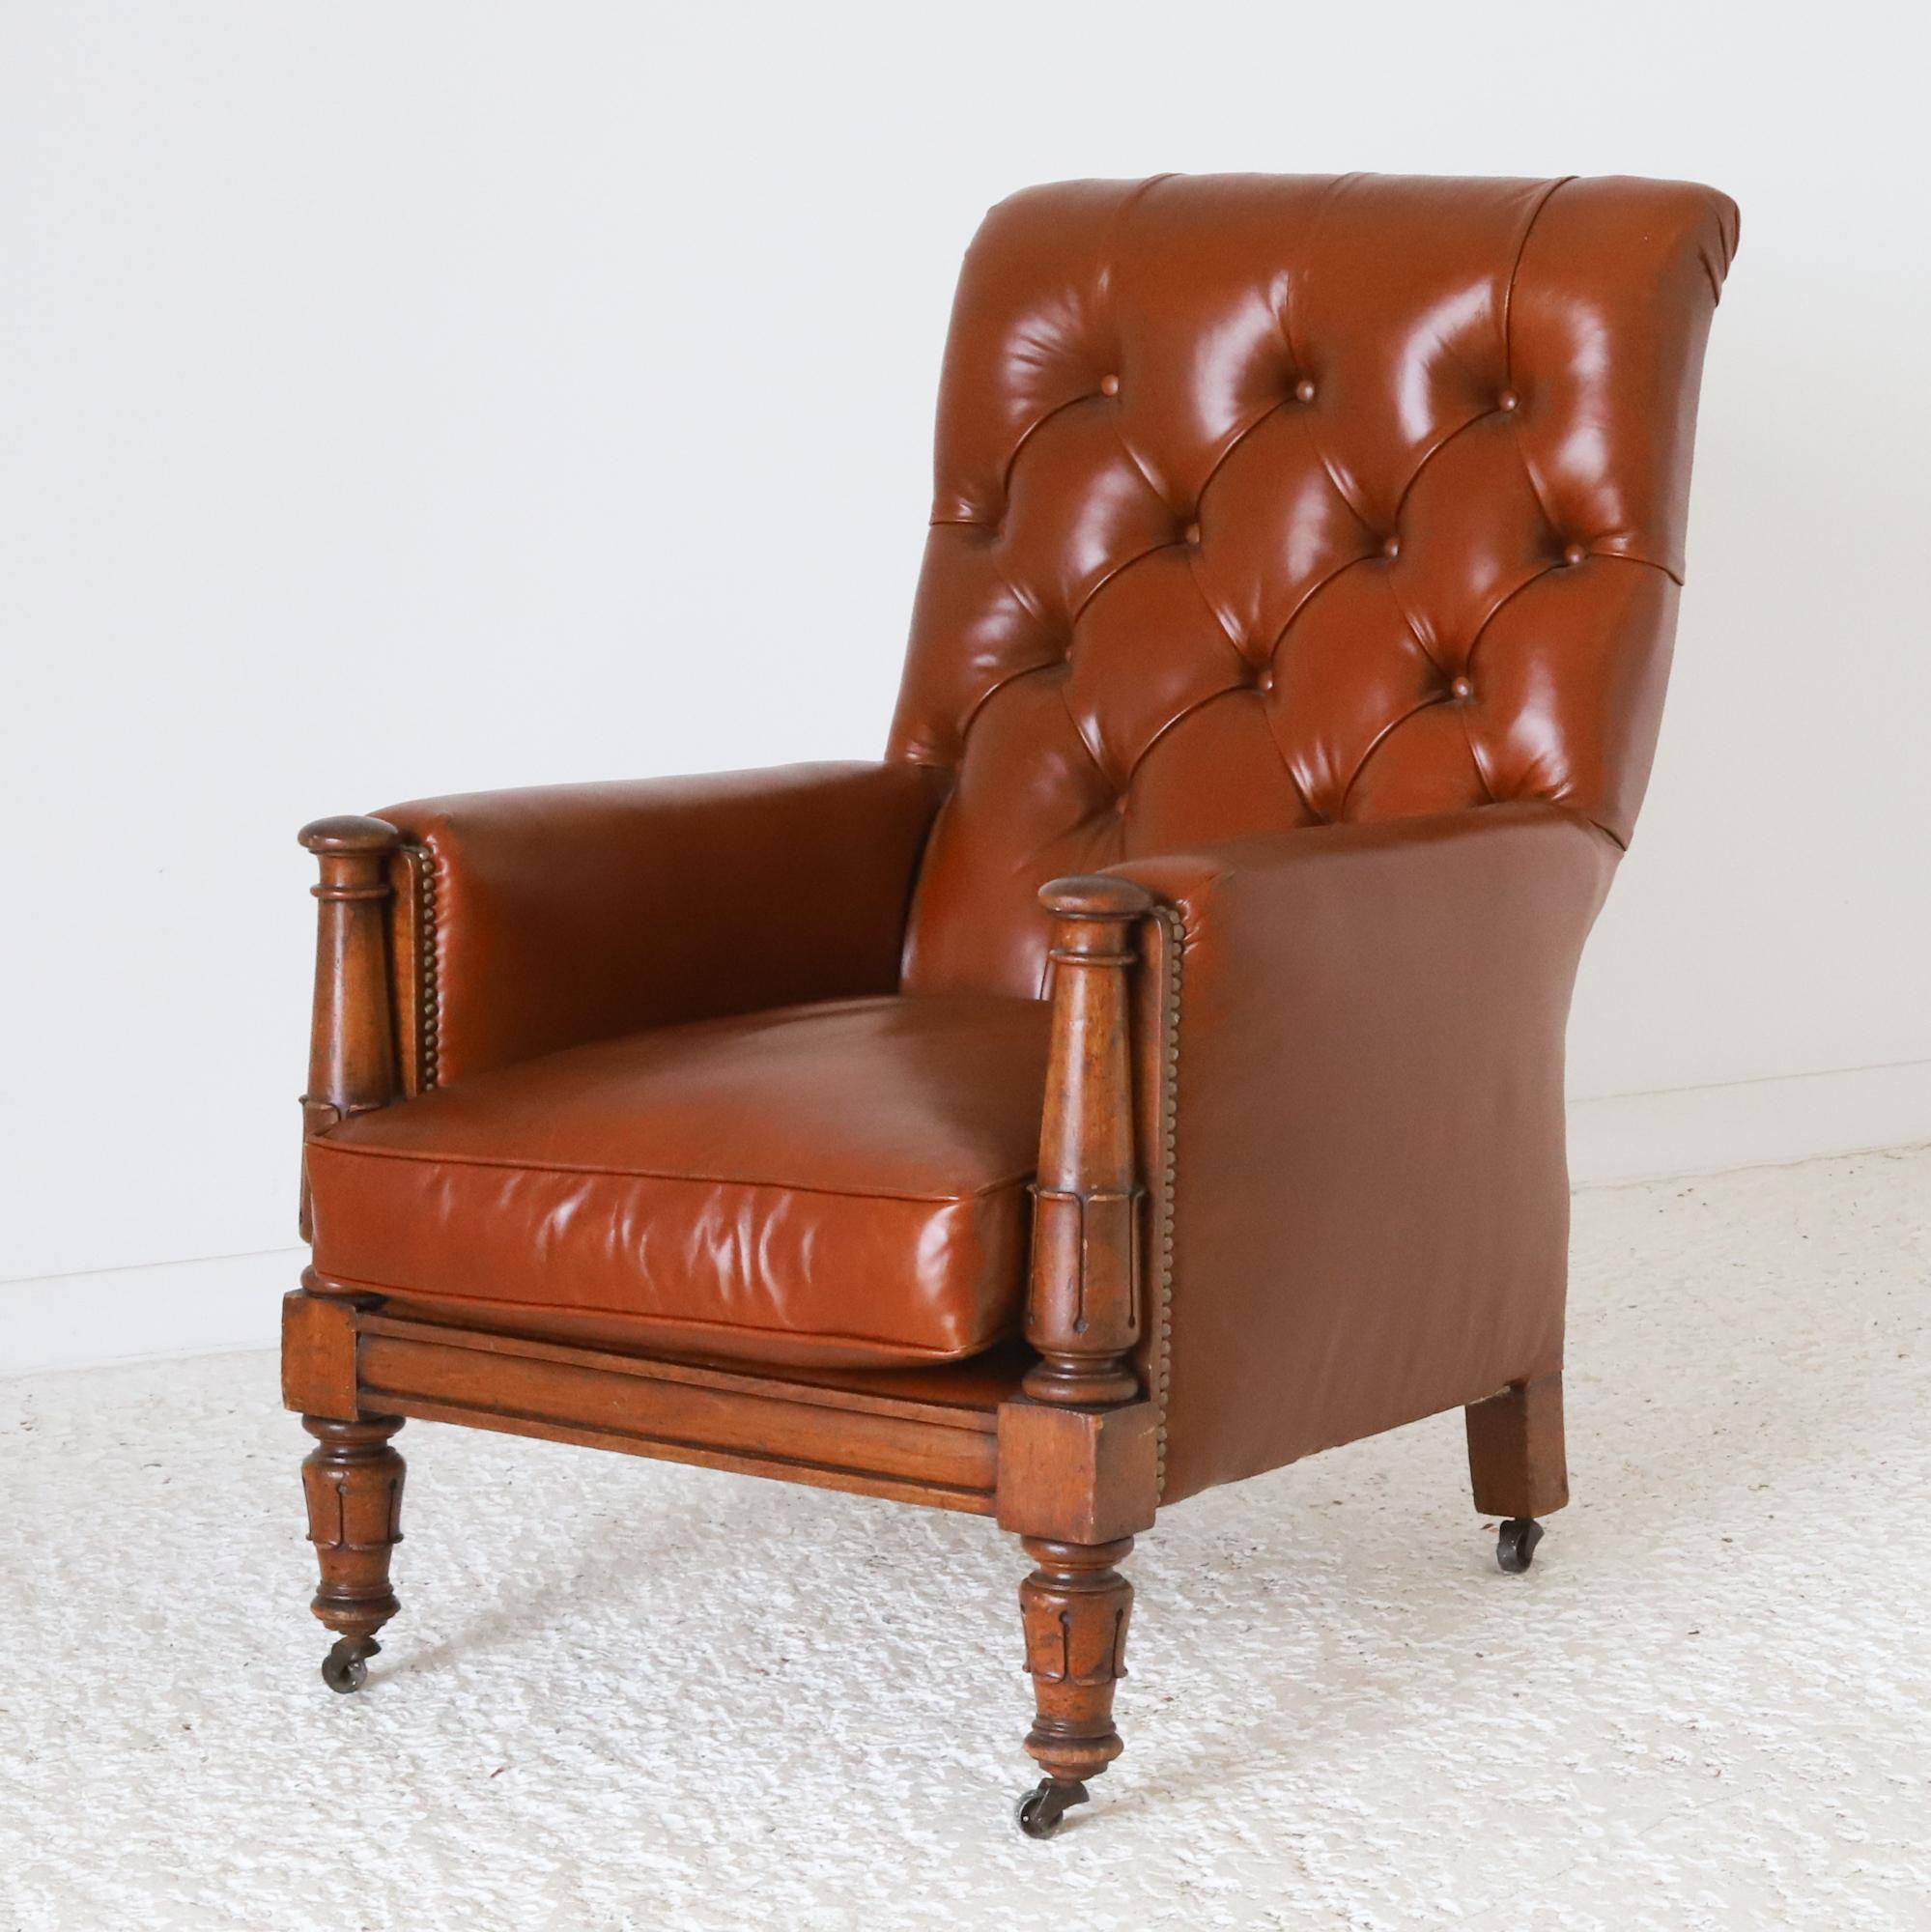 English c. 1830 Mahogany William IV Library Chair reupholstered in tan leather  For Sale 8